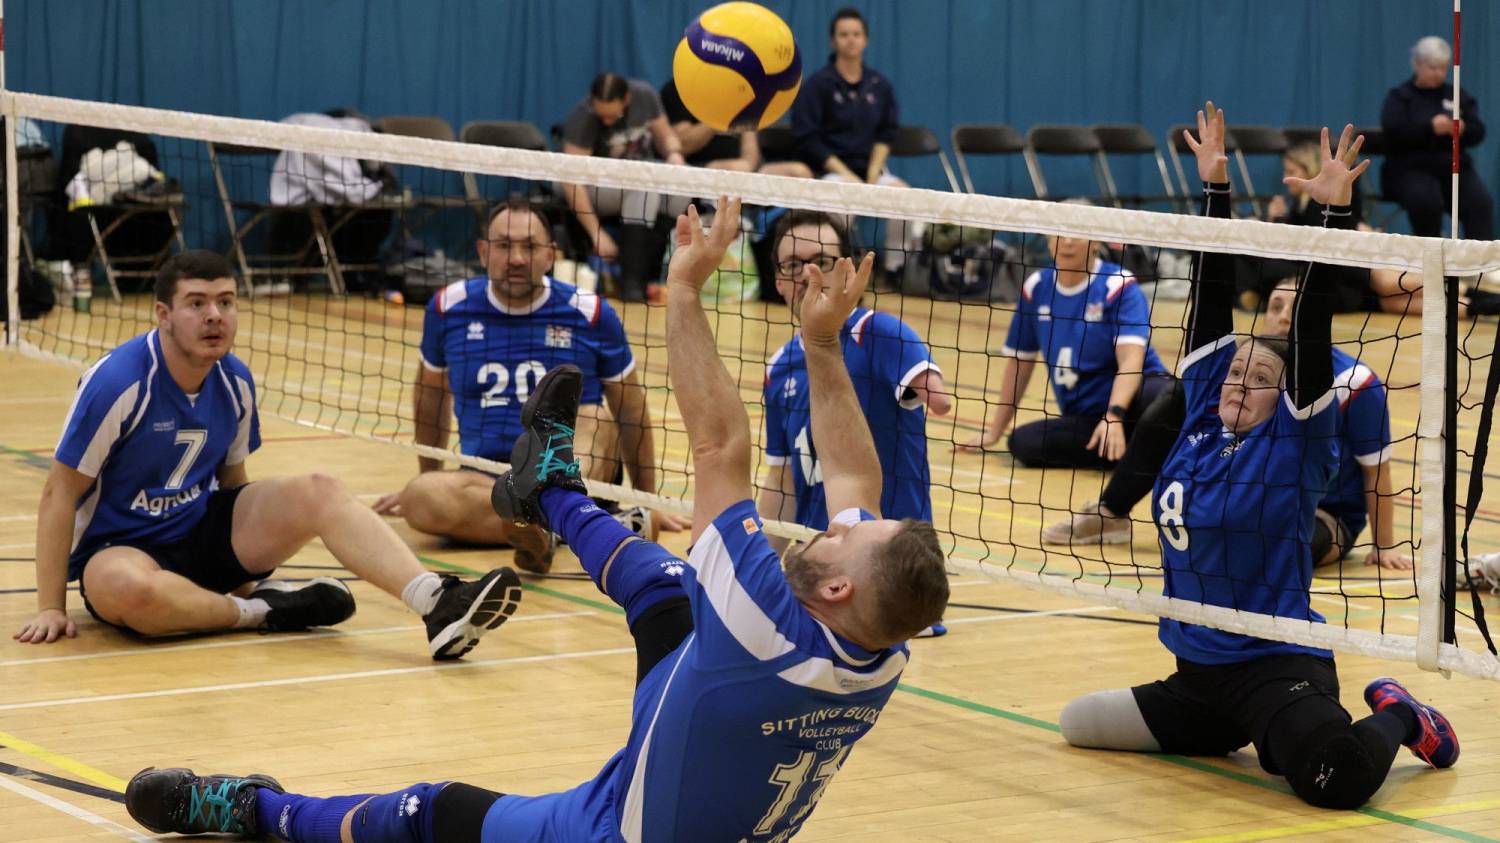 Sitting Volleyball Grand Prix 6 teams, playing schedule and live streaming